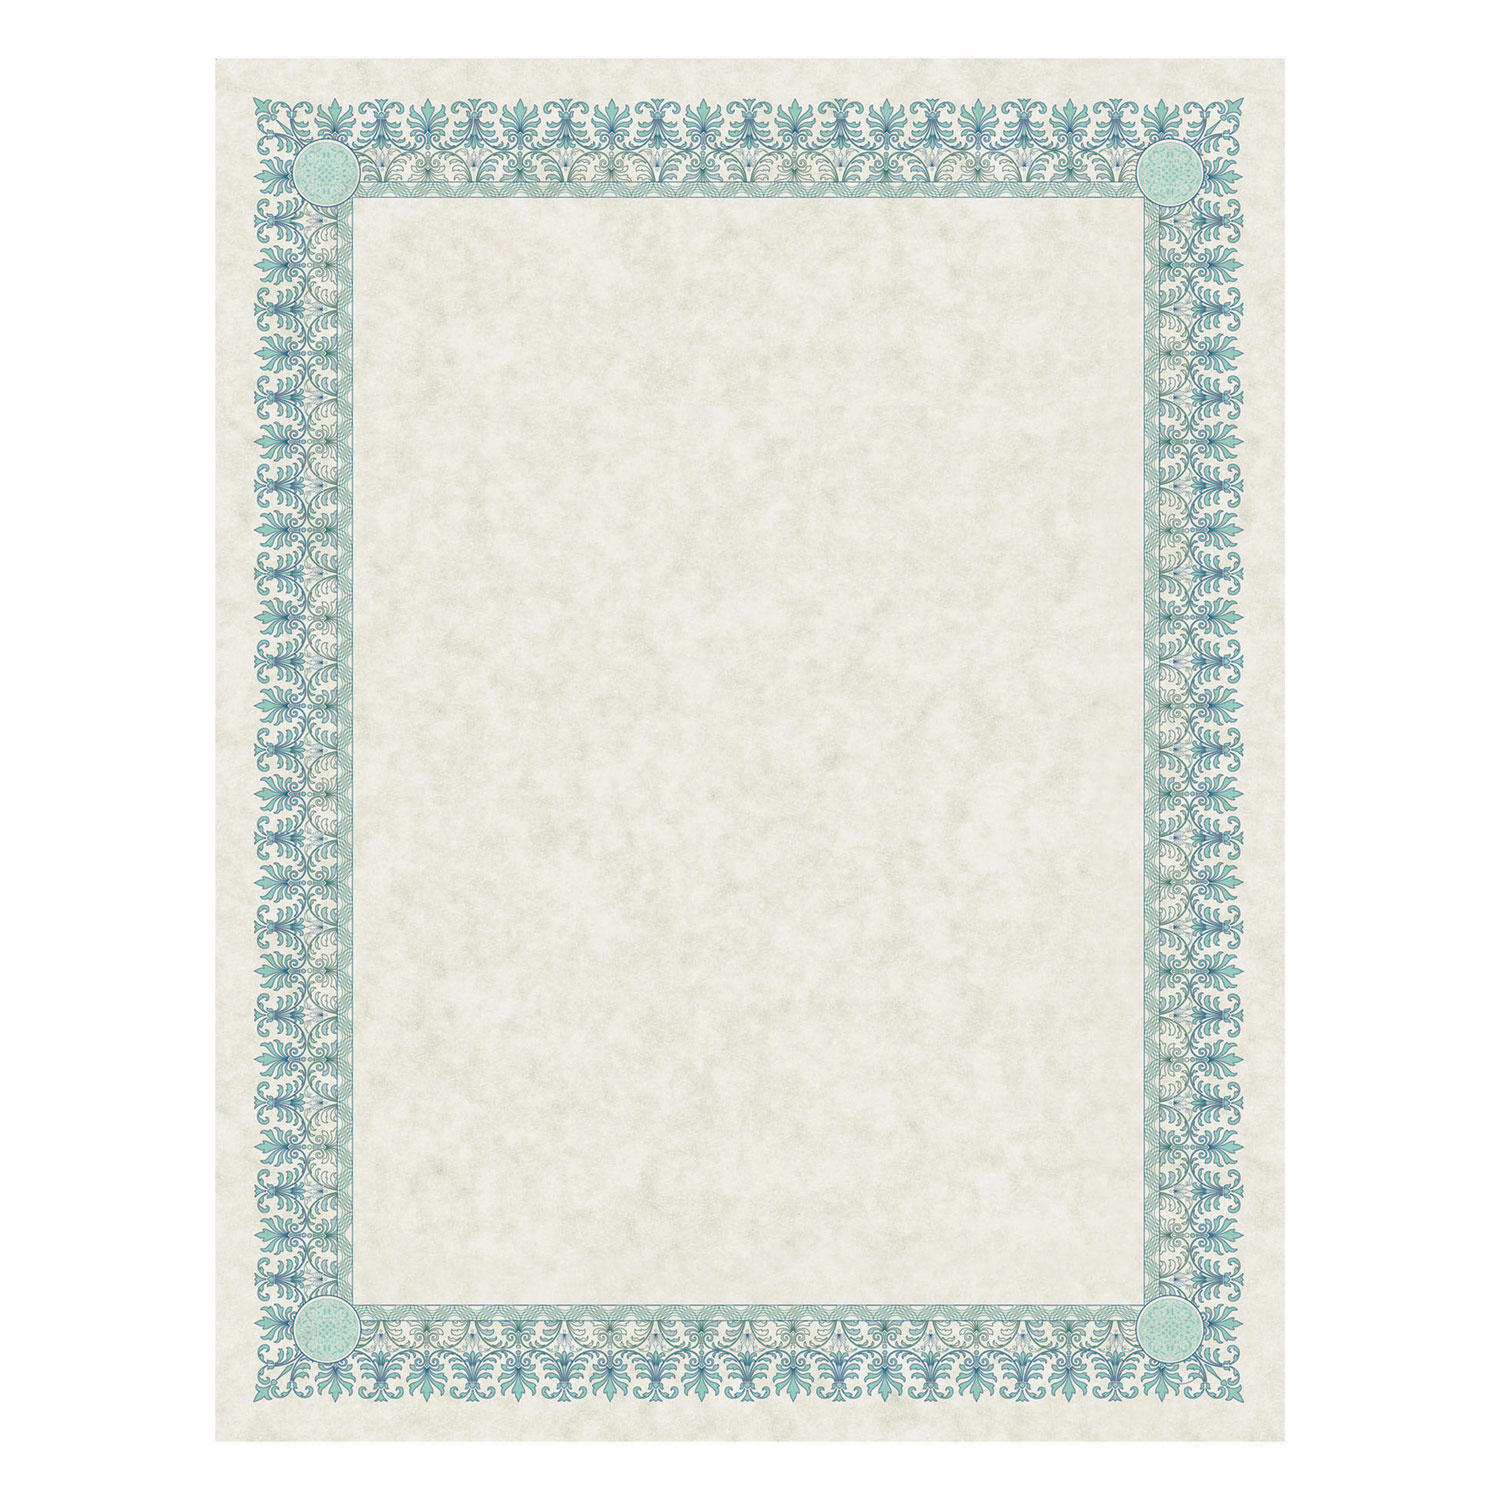  Southworth CT3R Parchment Certificates, Academic, Ivory w/ Green & Blue Border, 8 1/2 x 11, 25/Pack (SOUCT3R) 